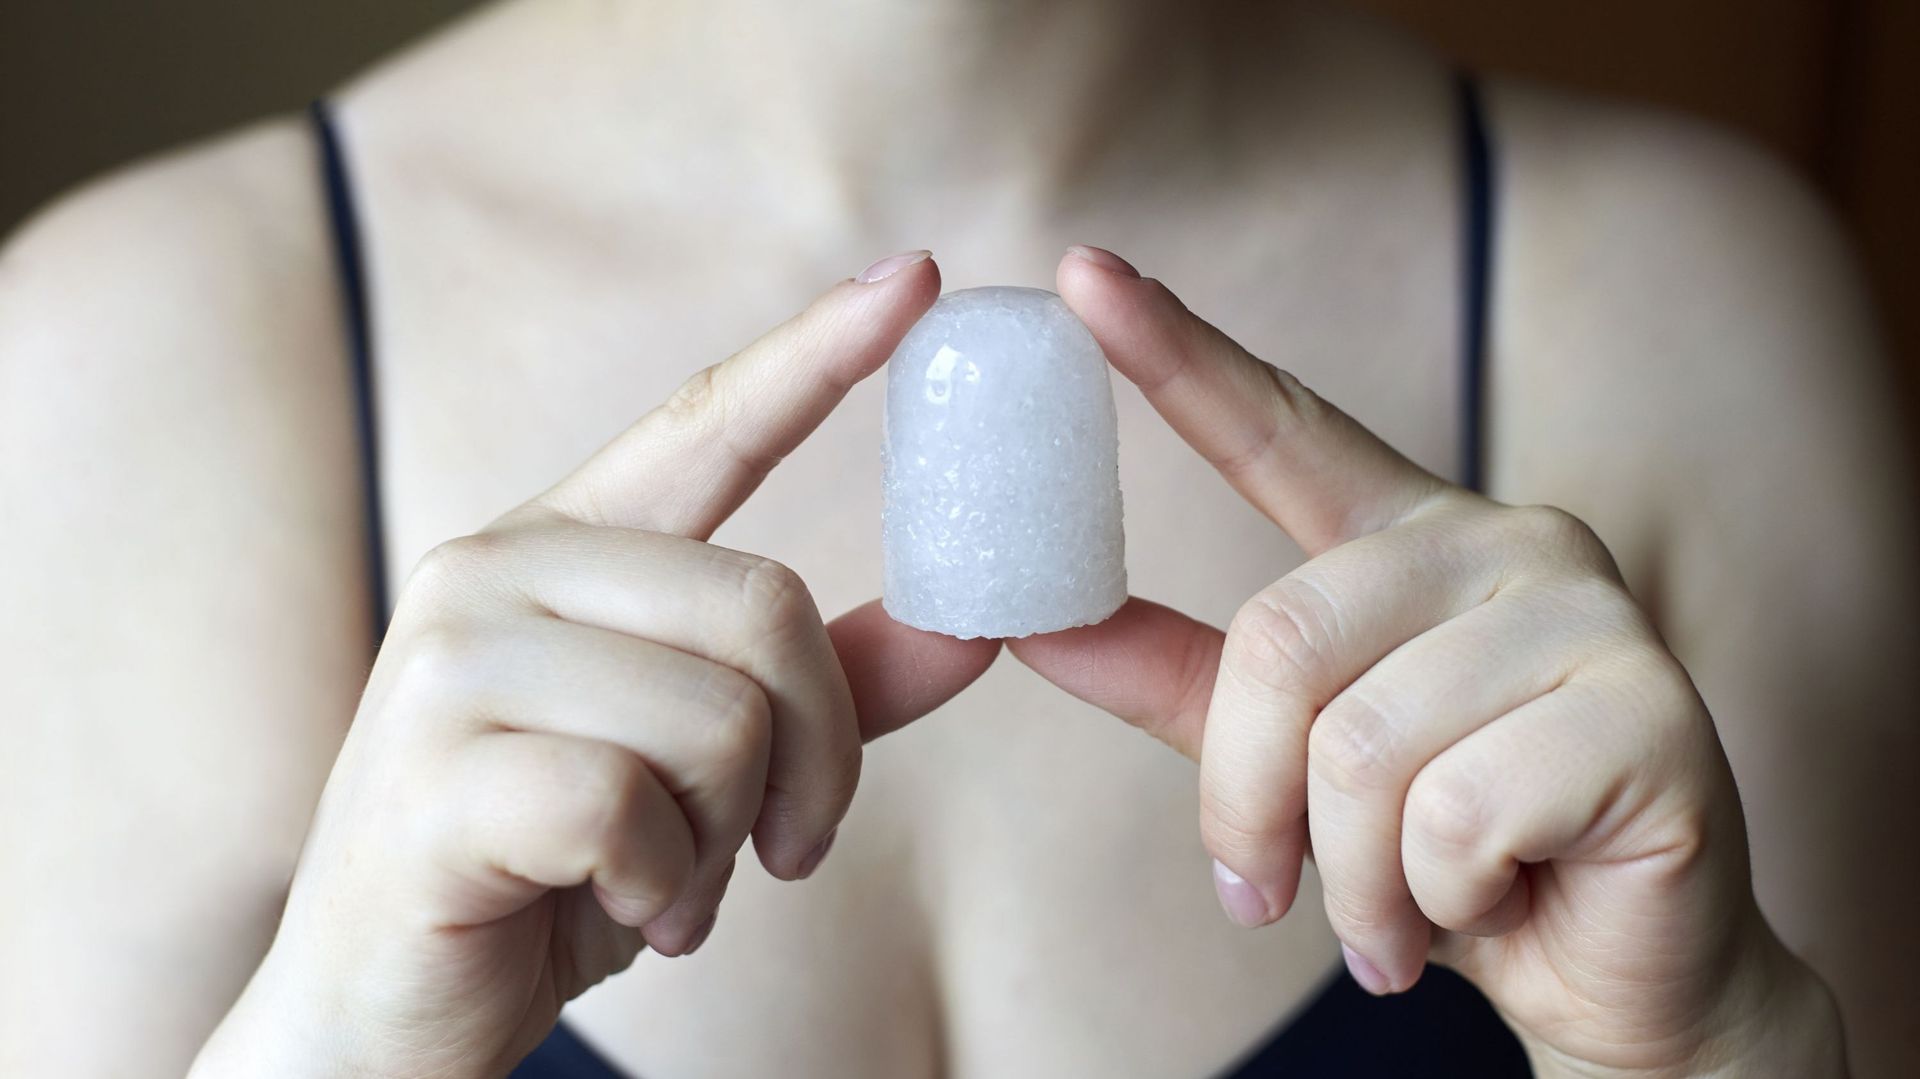 A woman holding a natural deodorant - alunite crystal